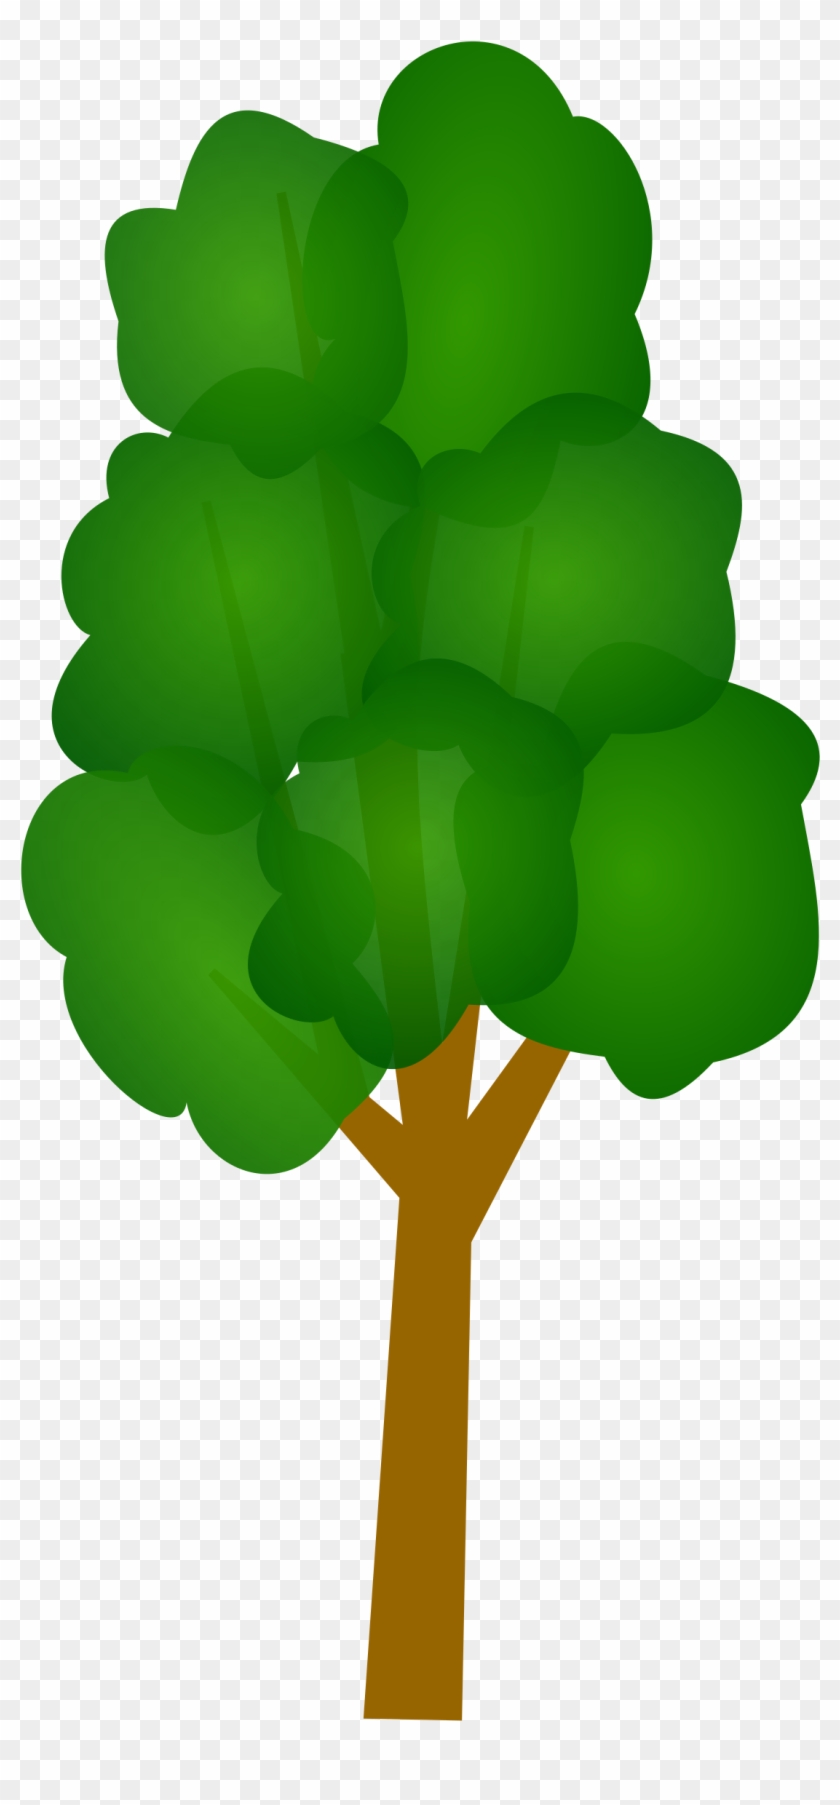 Free Clipart Images Of A Tree - Long Tree Vector Png #30169